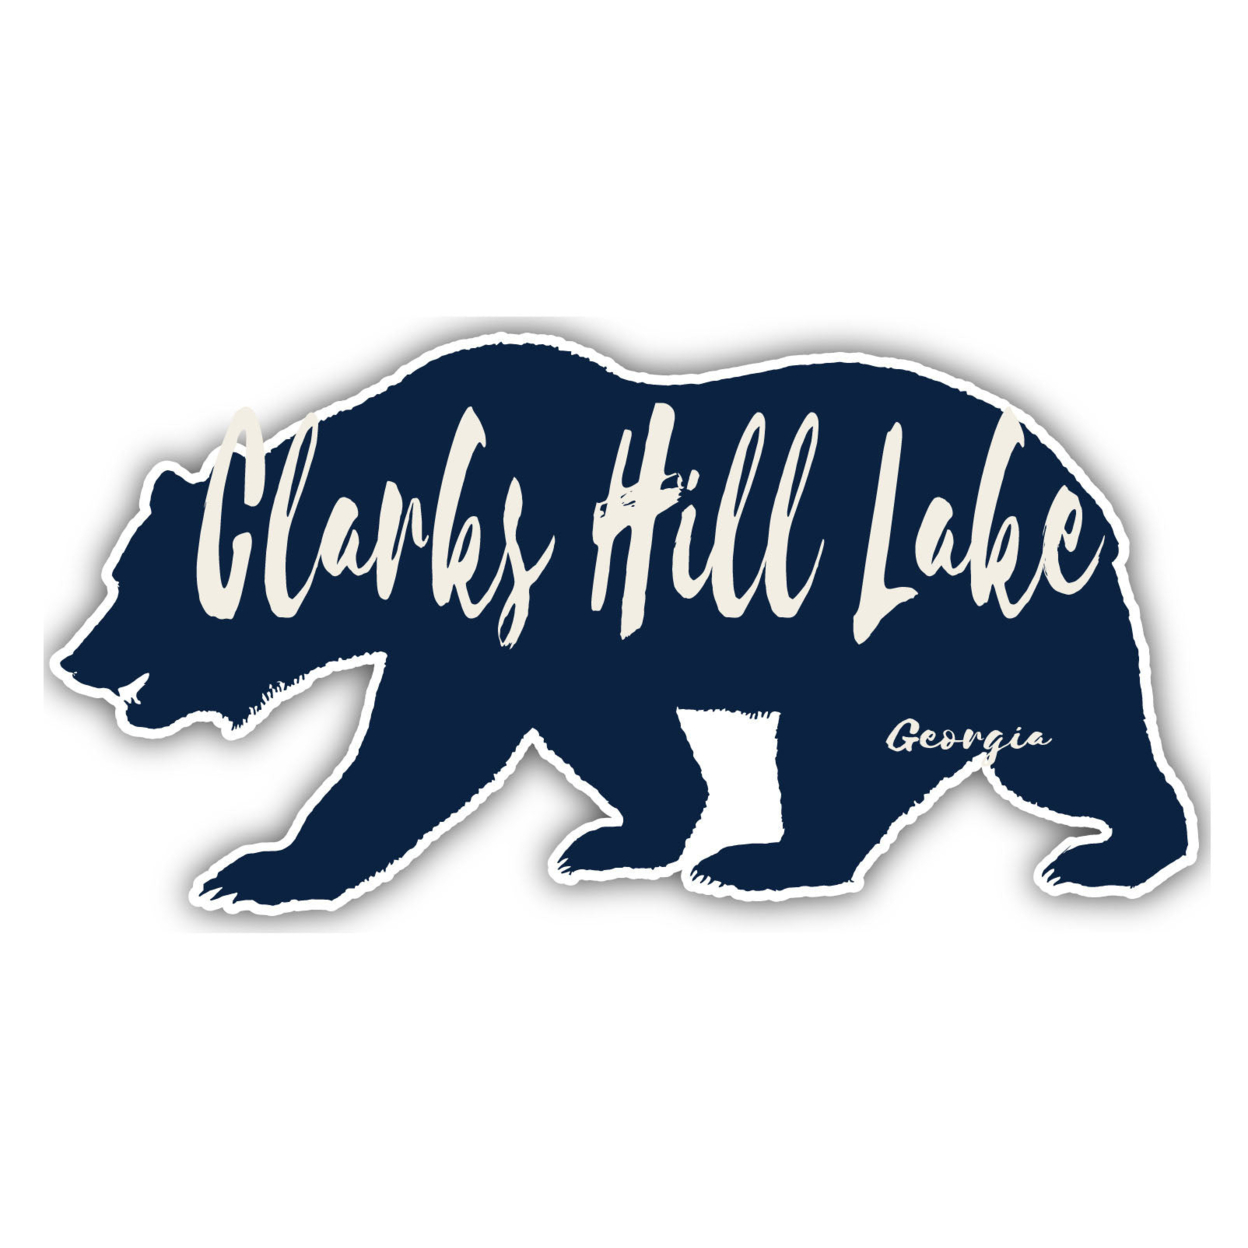 Clarks Hill Lake Georgia Souvenir Decorative Stickers (Choose Theme And Size) - 4-Pack, 2-Inch, Camp Life